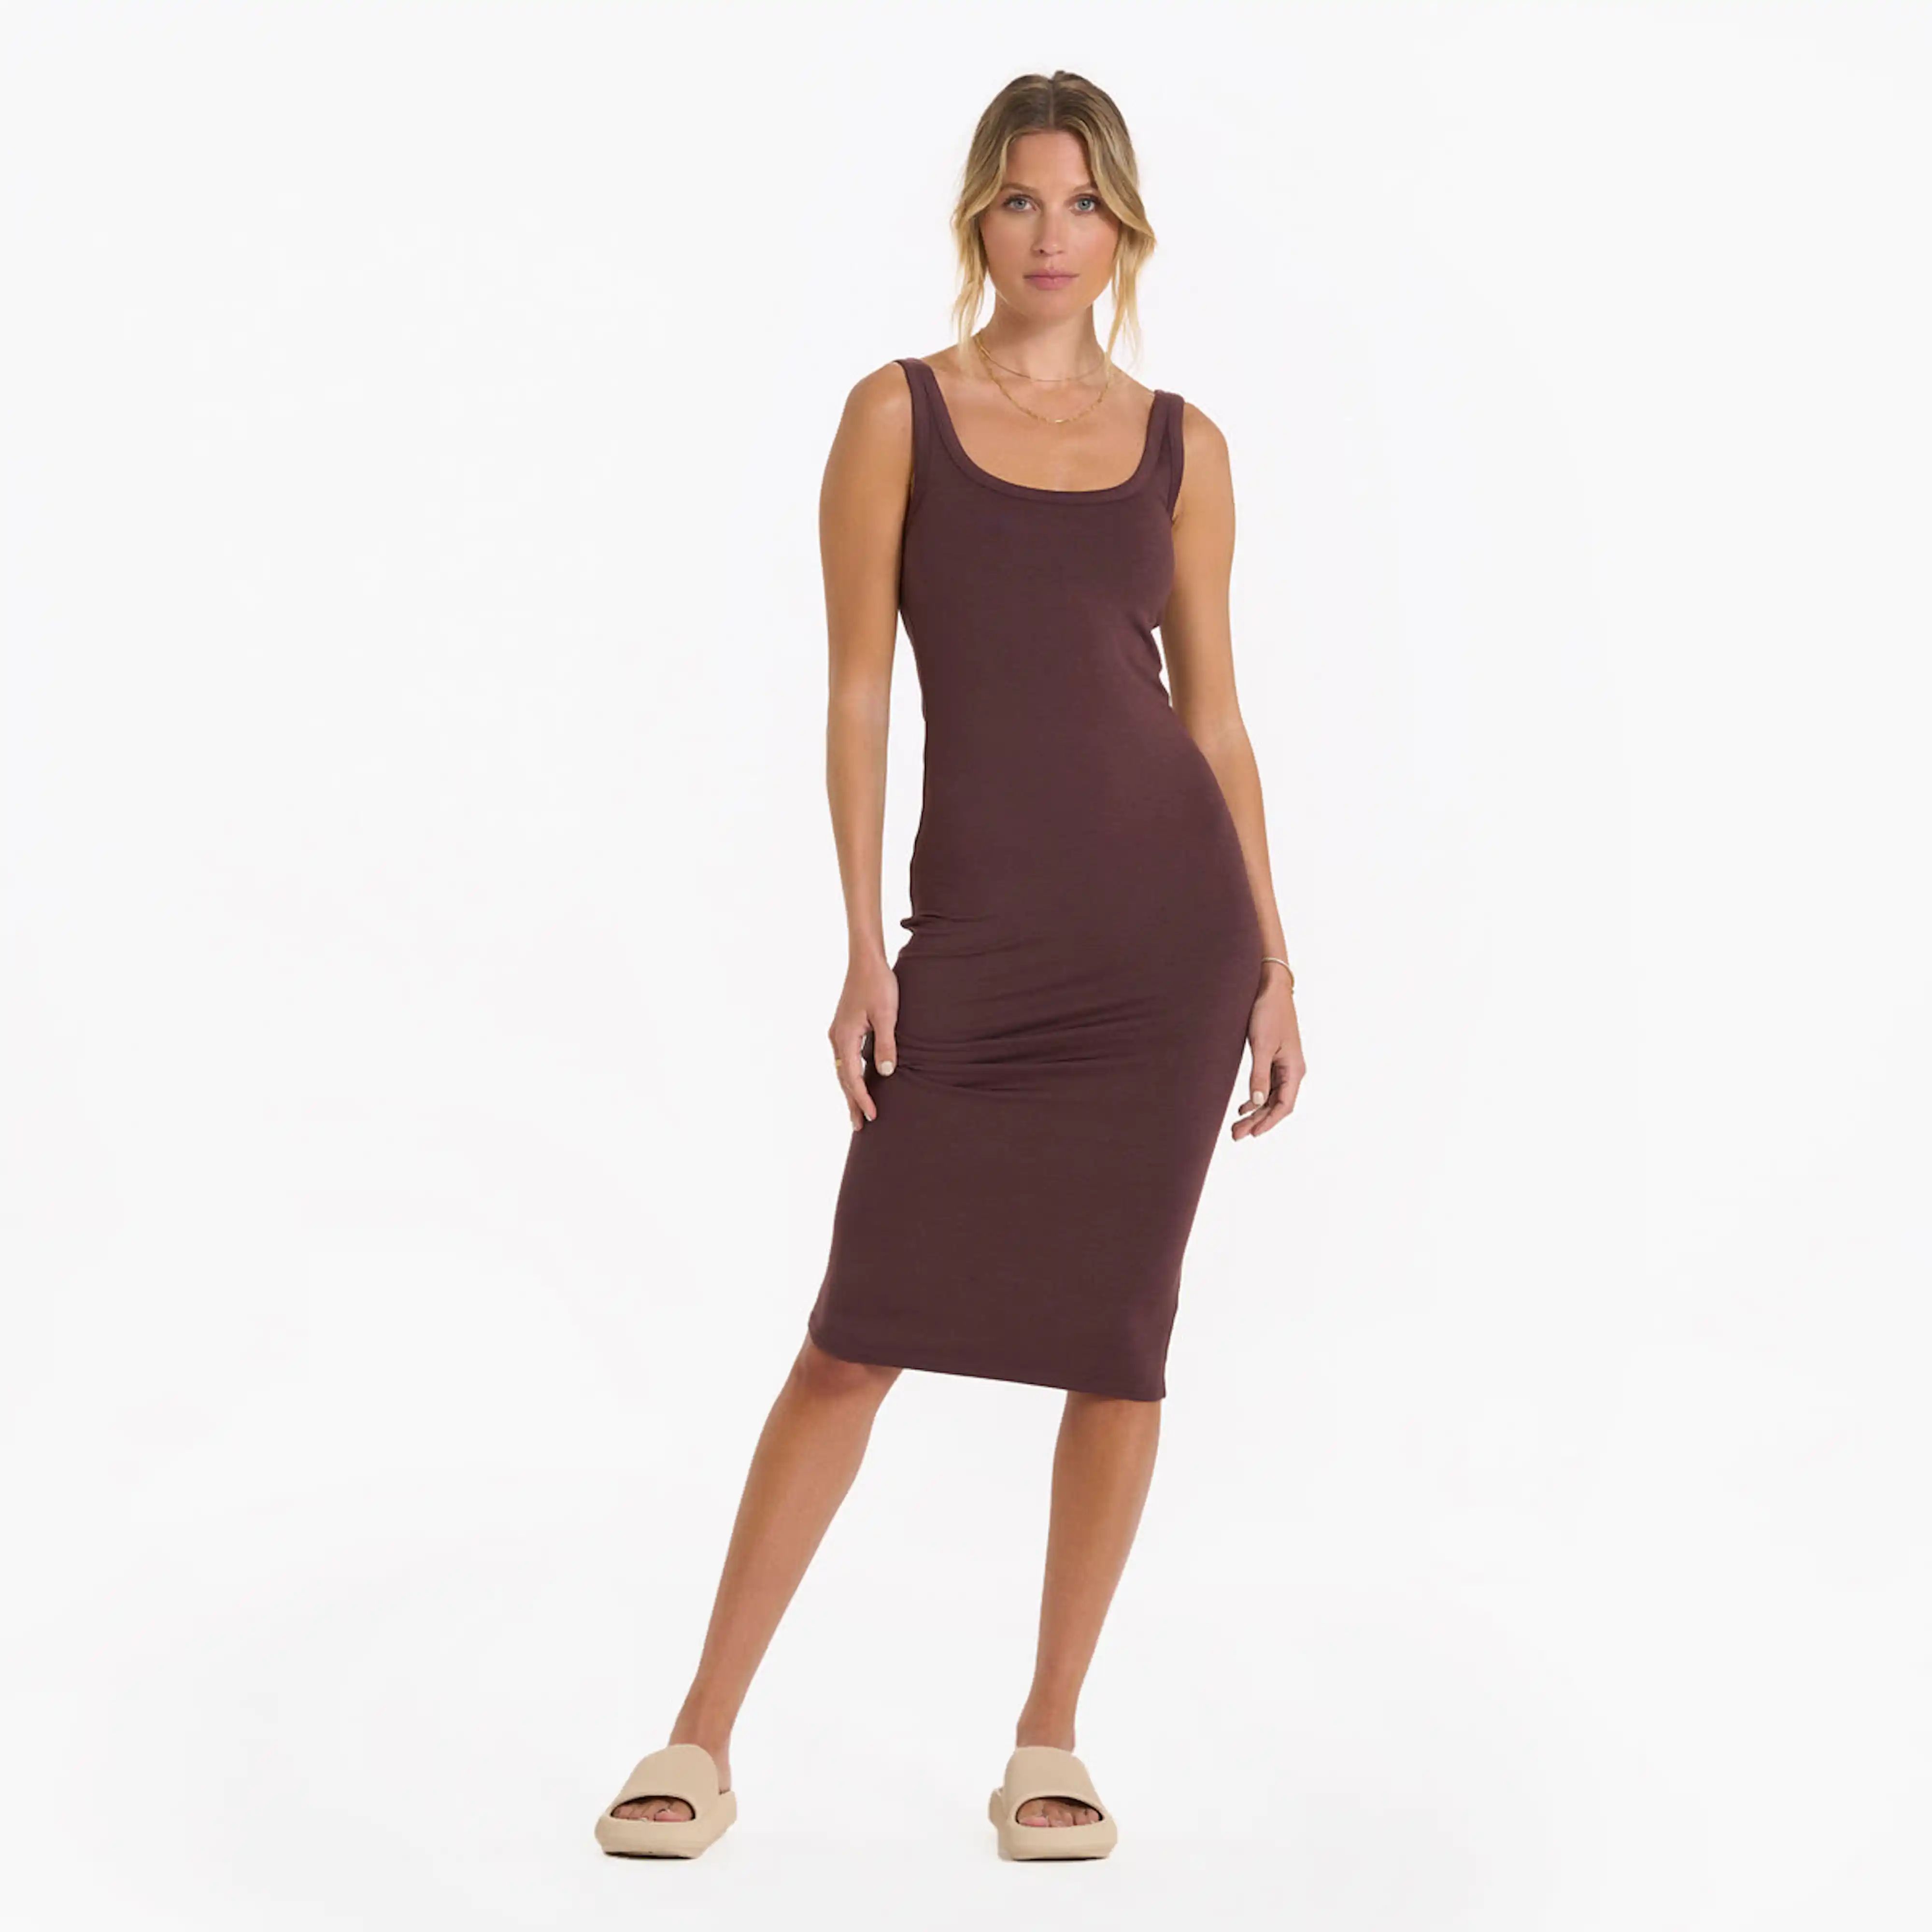 Our signature DreamKnit ™ fabric makes this the world's softest dress | Vuori Clothing (US & Canada)